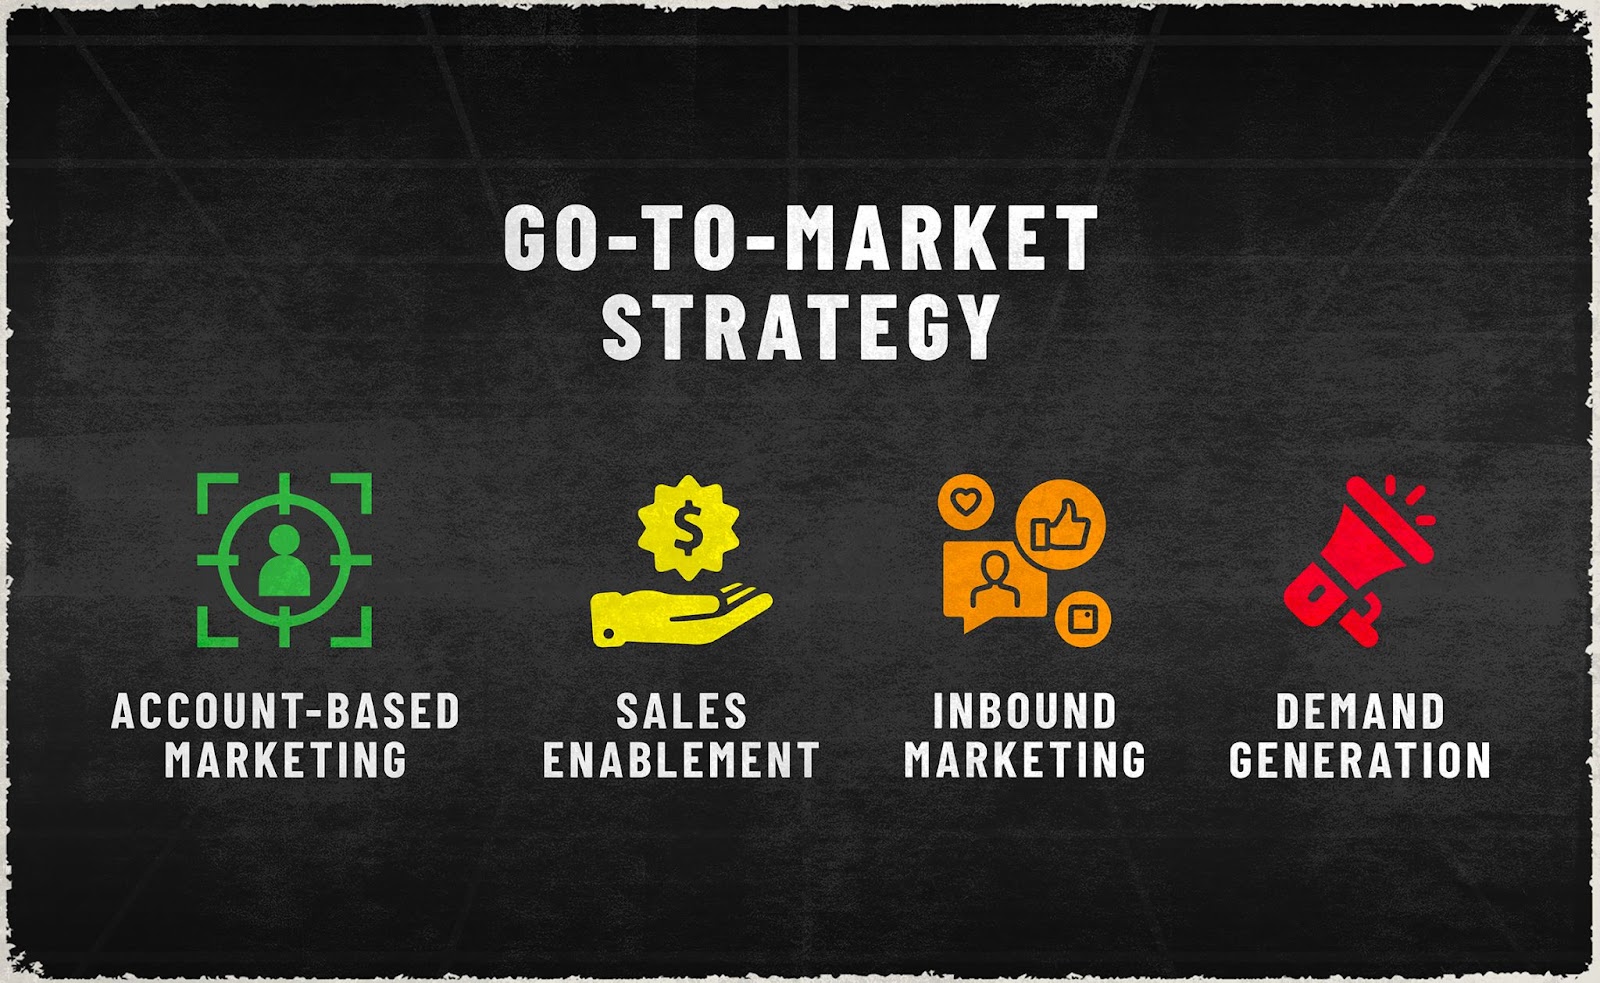 go to market strategy illustrated by 4 icons each a color of the rainbow